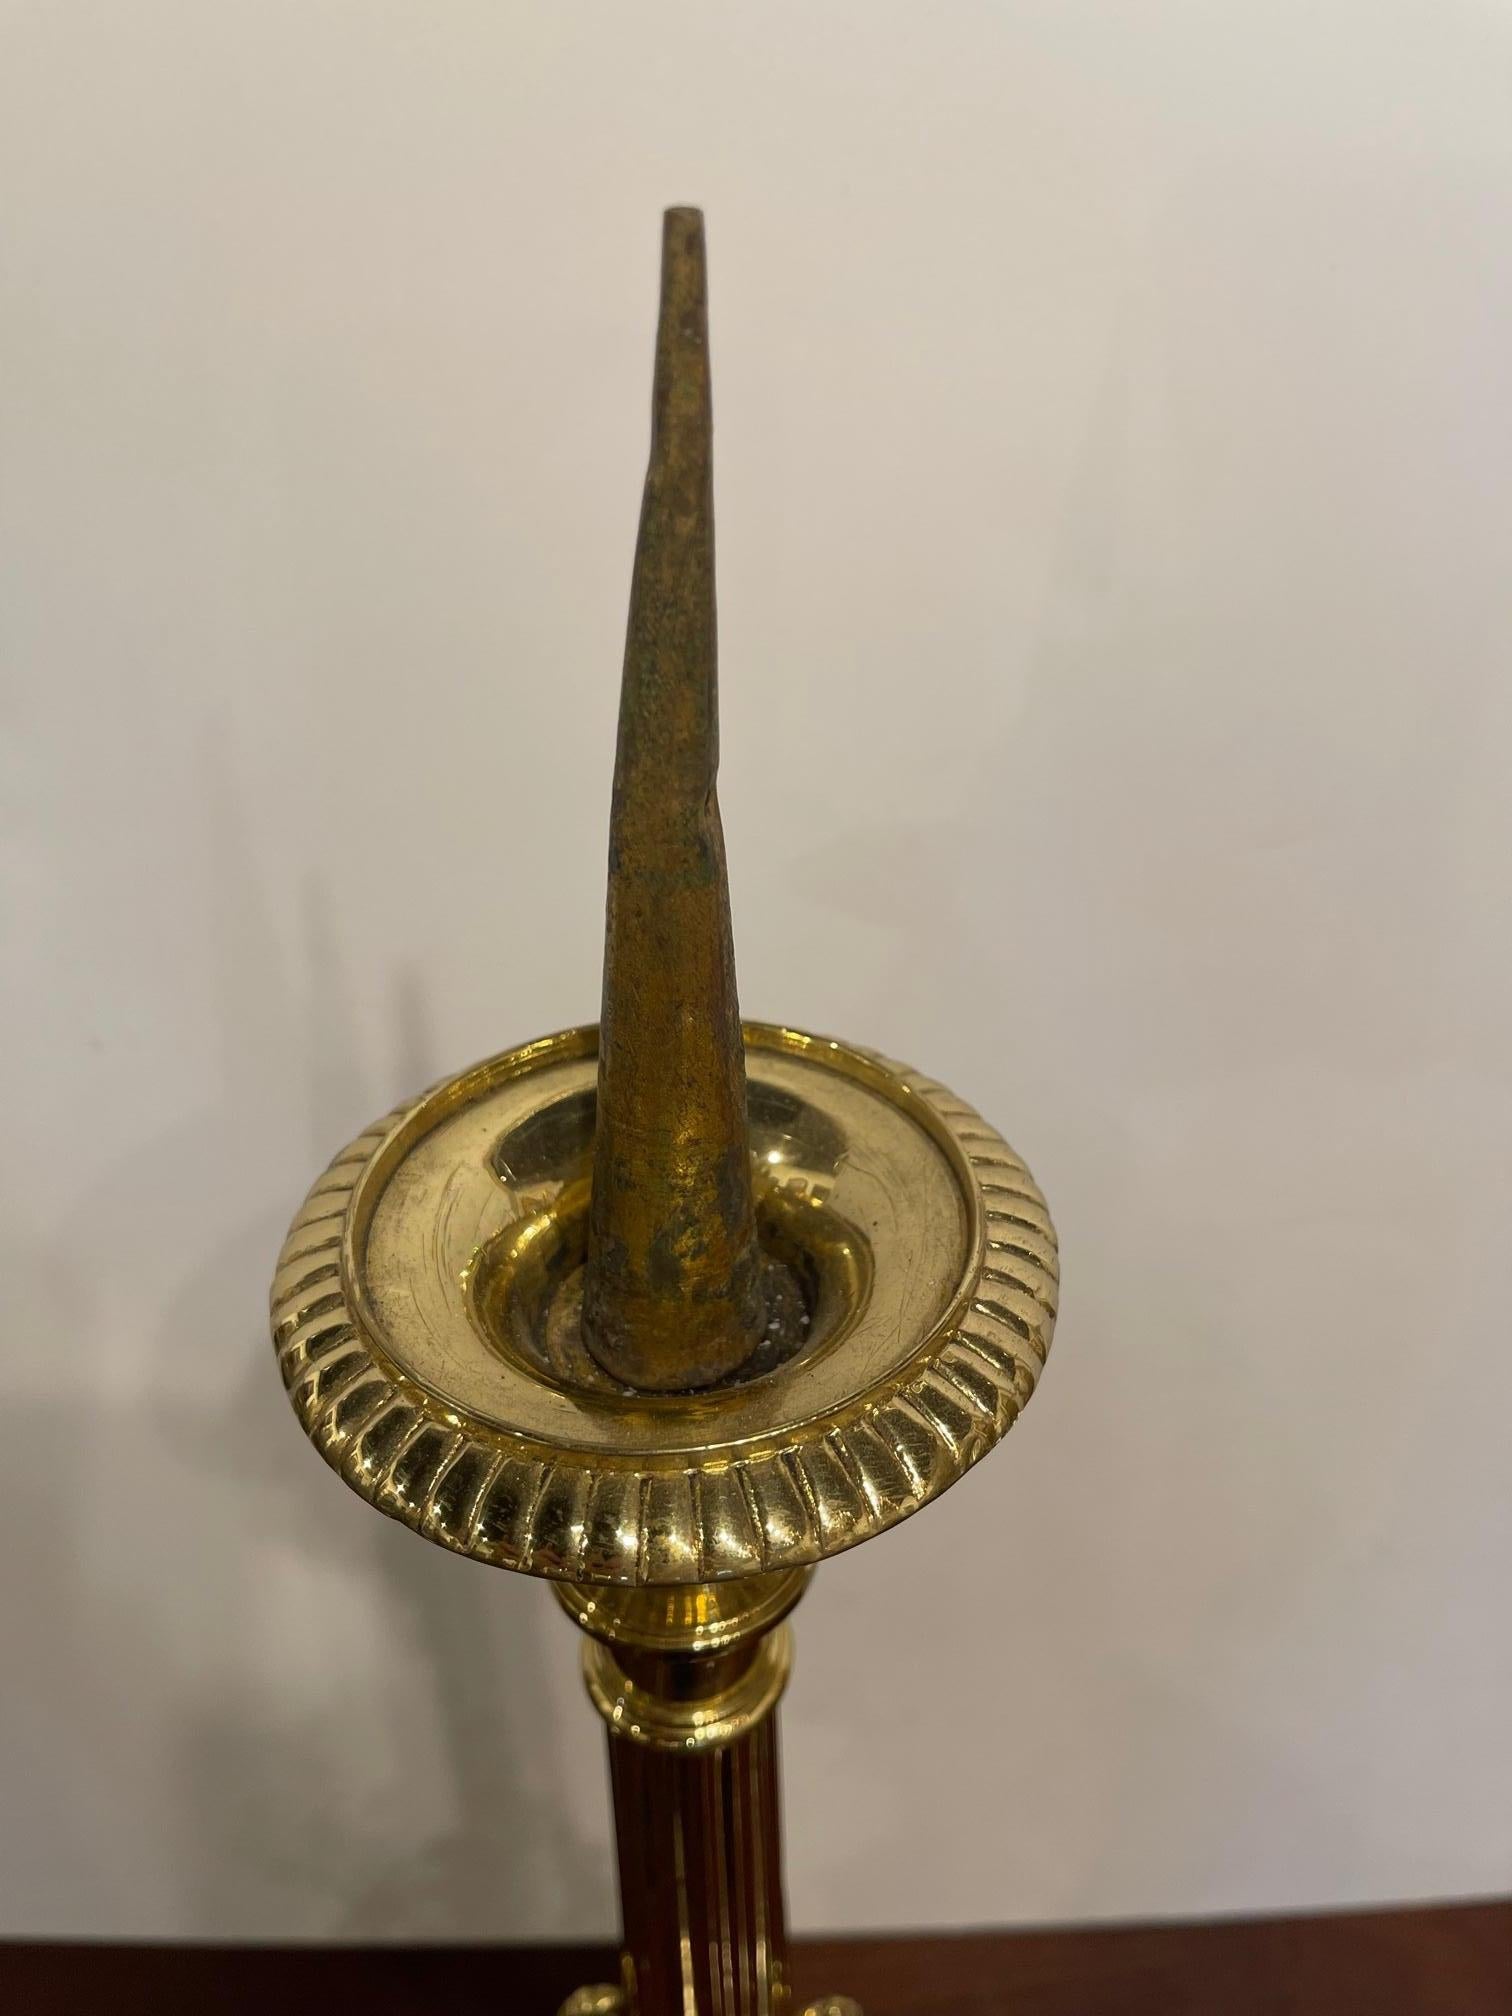 French Polished Brass Decorative Pricket or Candlestick, 19th Century For Sale 4